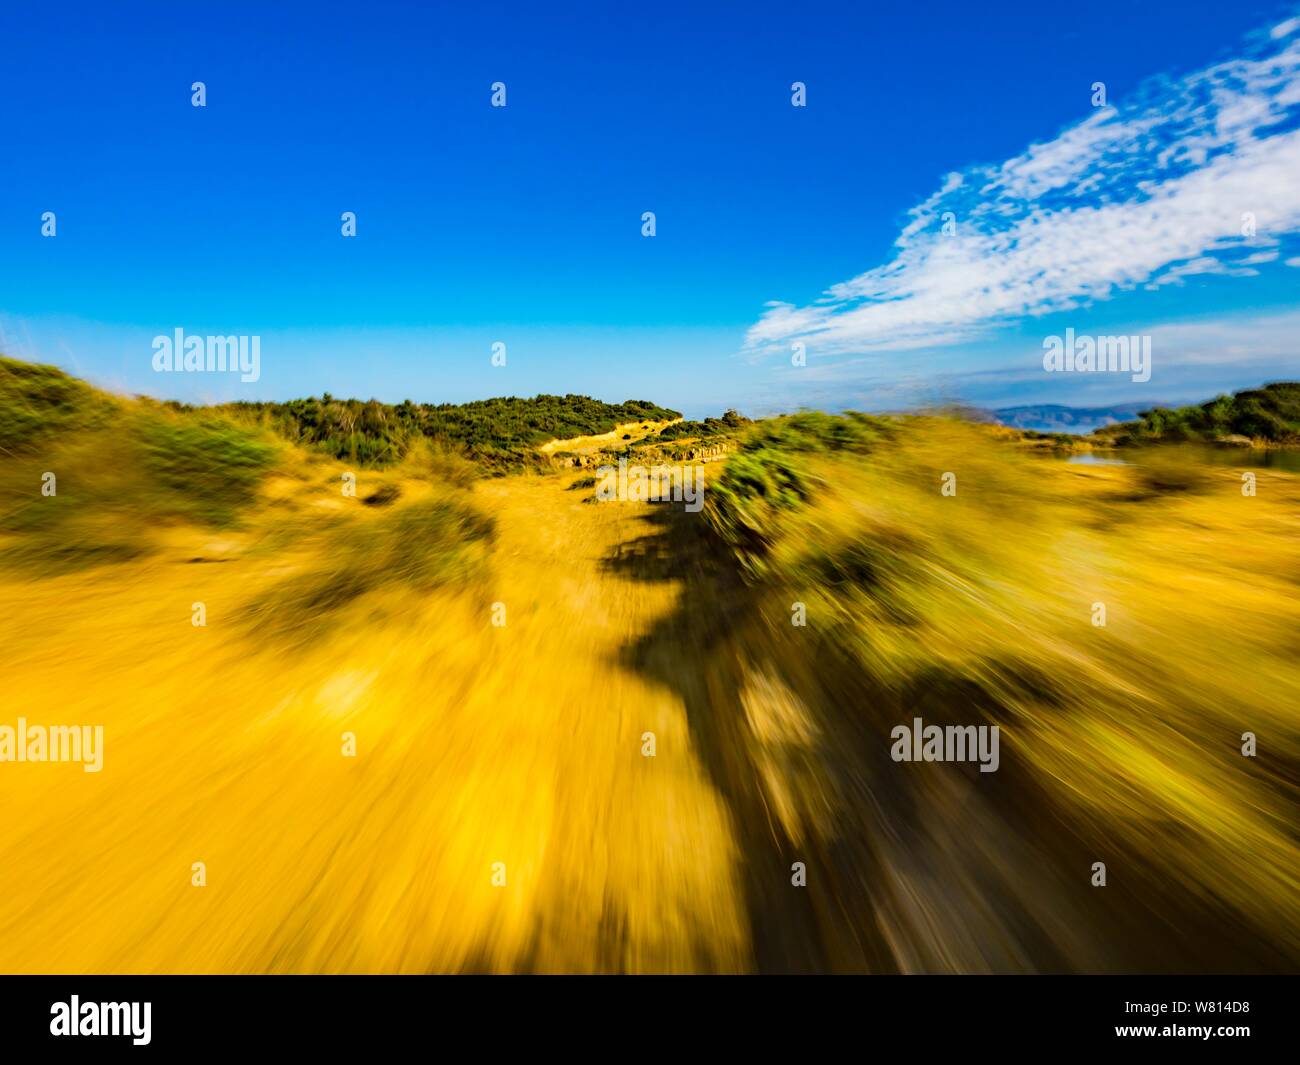 Sandy terrain vacated vacant countryside speeding low view along natural rocky ridge shadow on ground foreground landscape natural environment Stock Photo